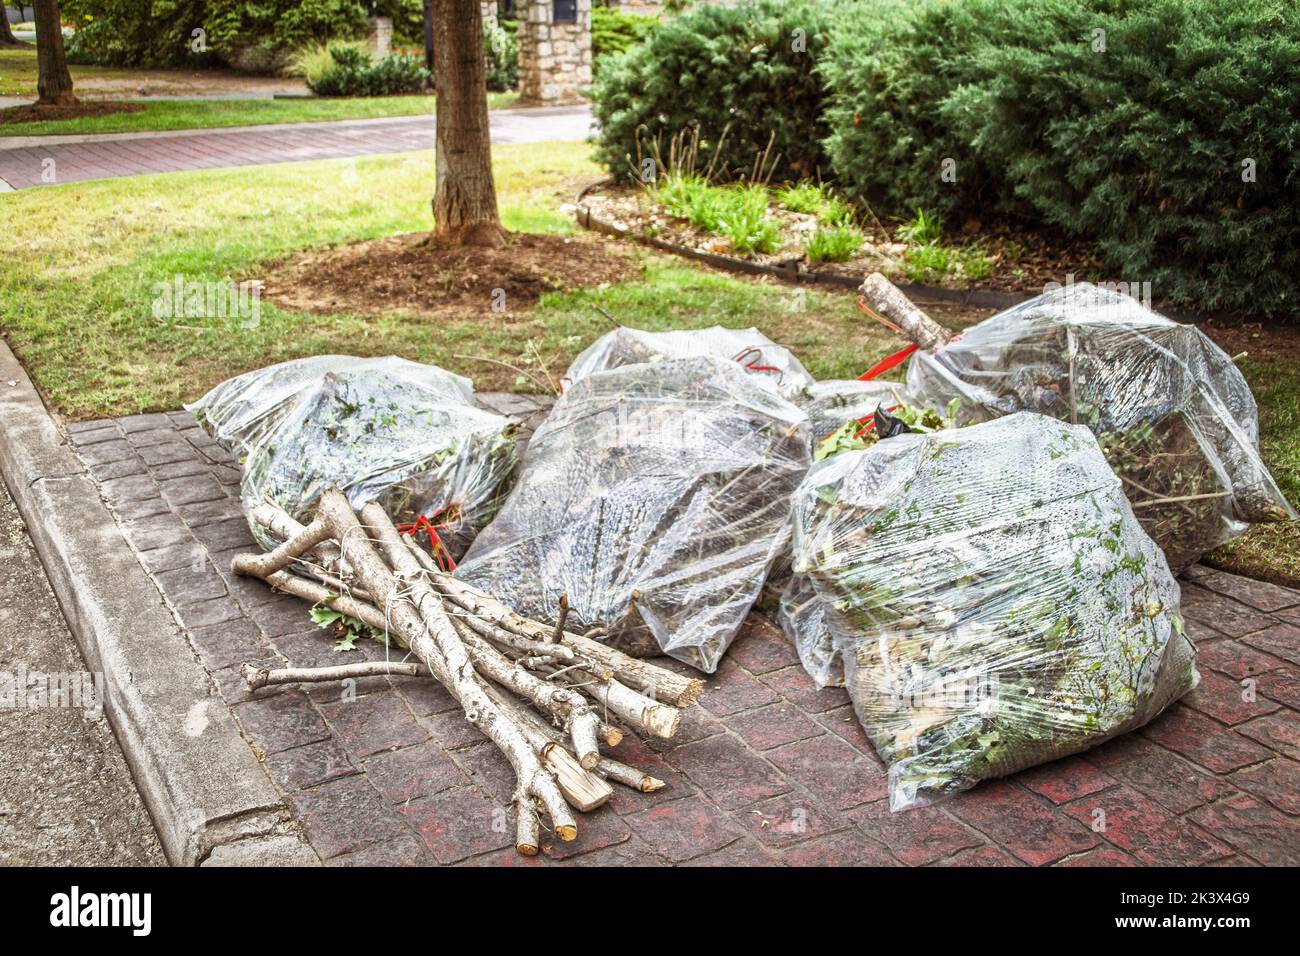 https://c8.alamy.com/comp/2K3X4G9/clear-plastic-bags-from-yard-cleanup-piled-at-curb-for-pickup-along-with-cut-sticks-tied-together-2K3X4G9.jpg